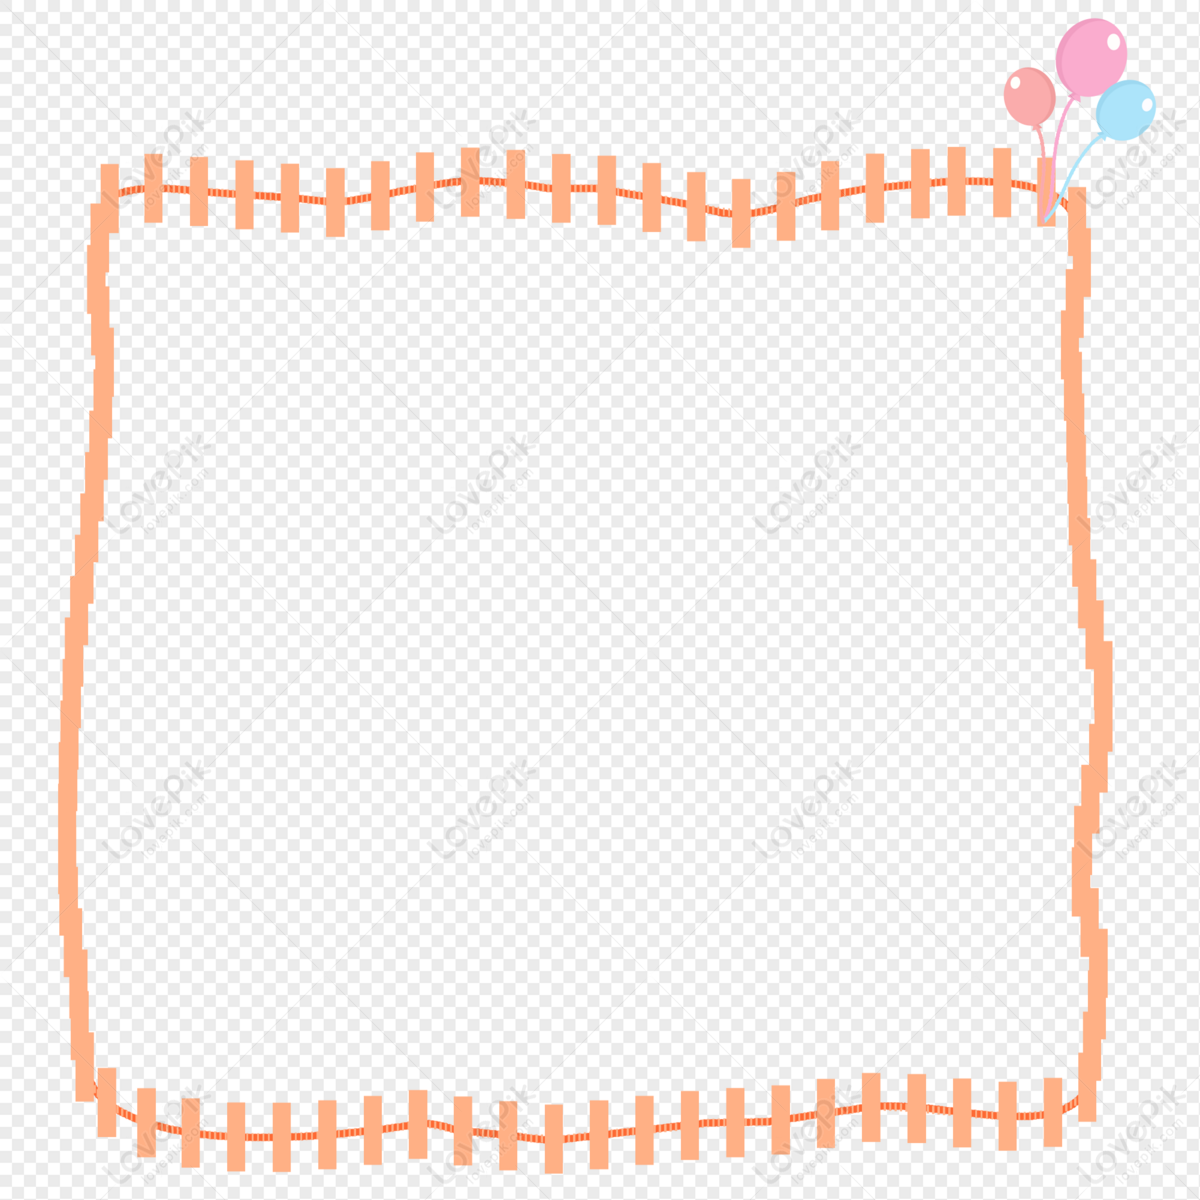 Watermark Border PNG Images With Transparent Background | Free Download ...